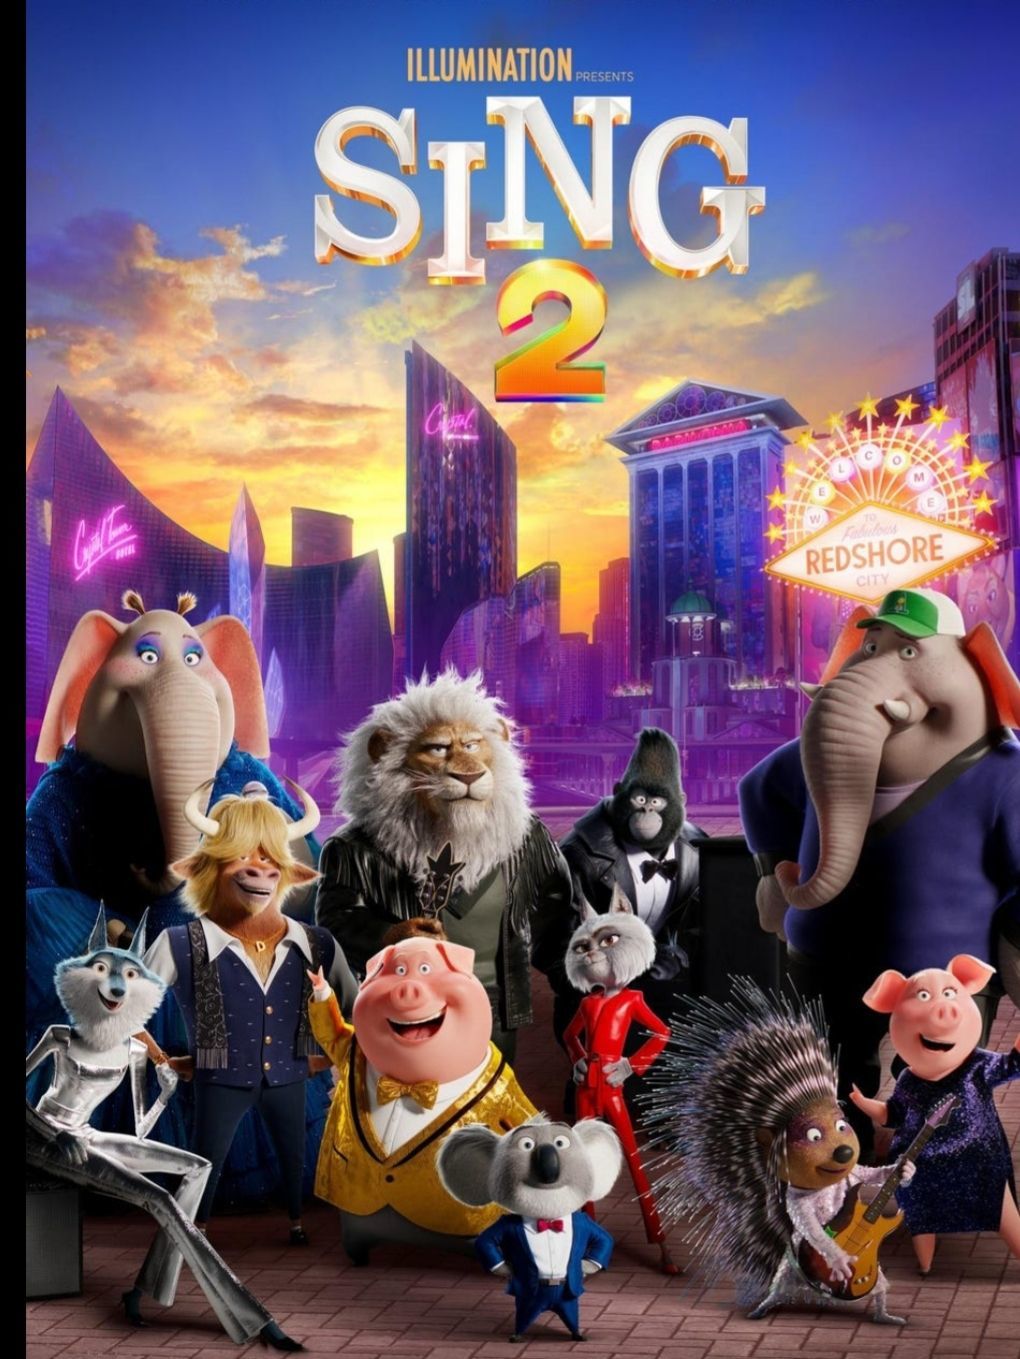 Family Movie Matinee @ The Pine! "Sing 2"